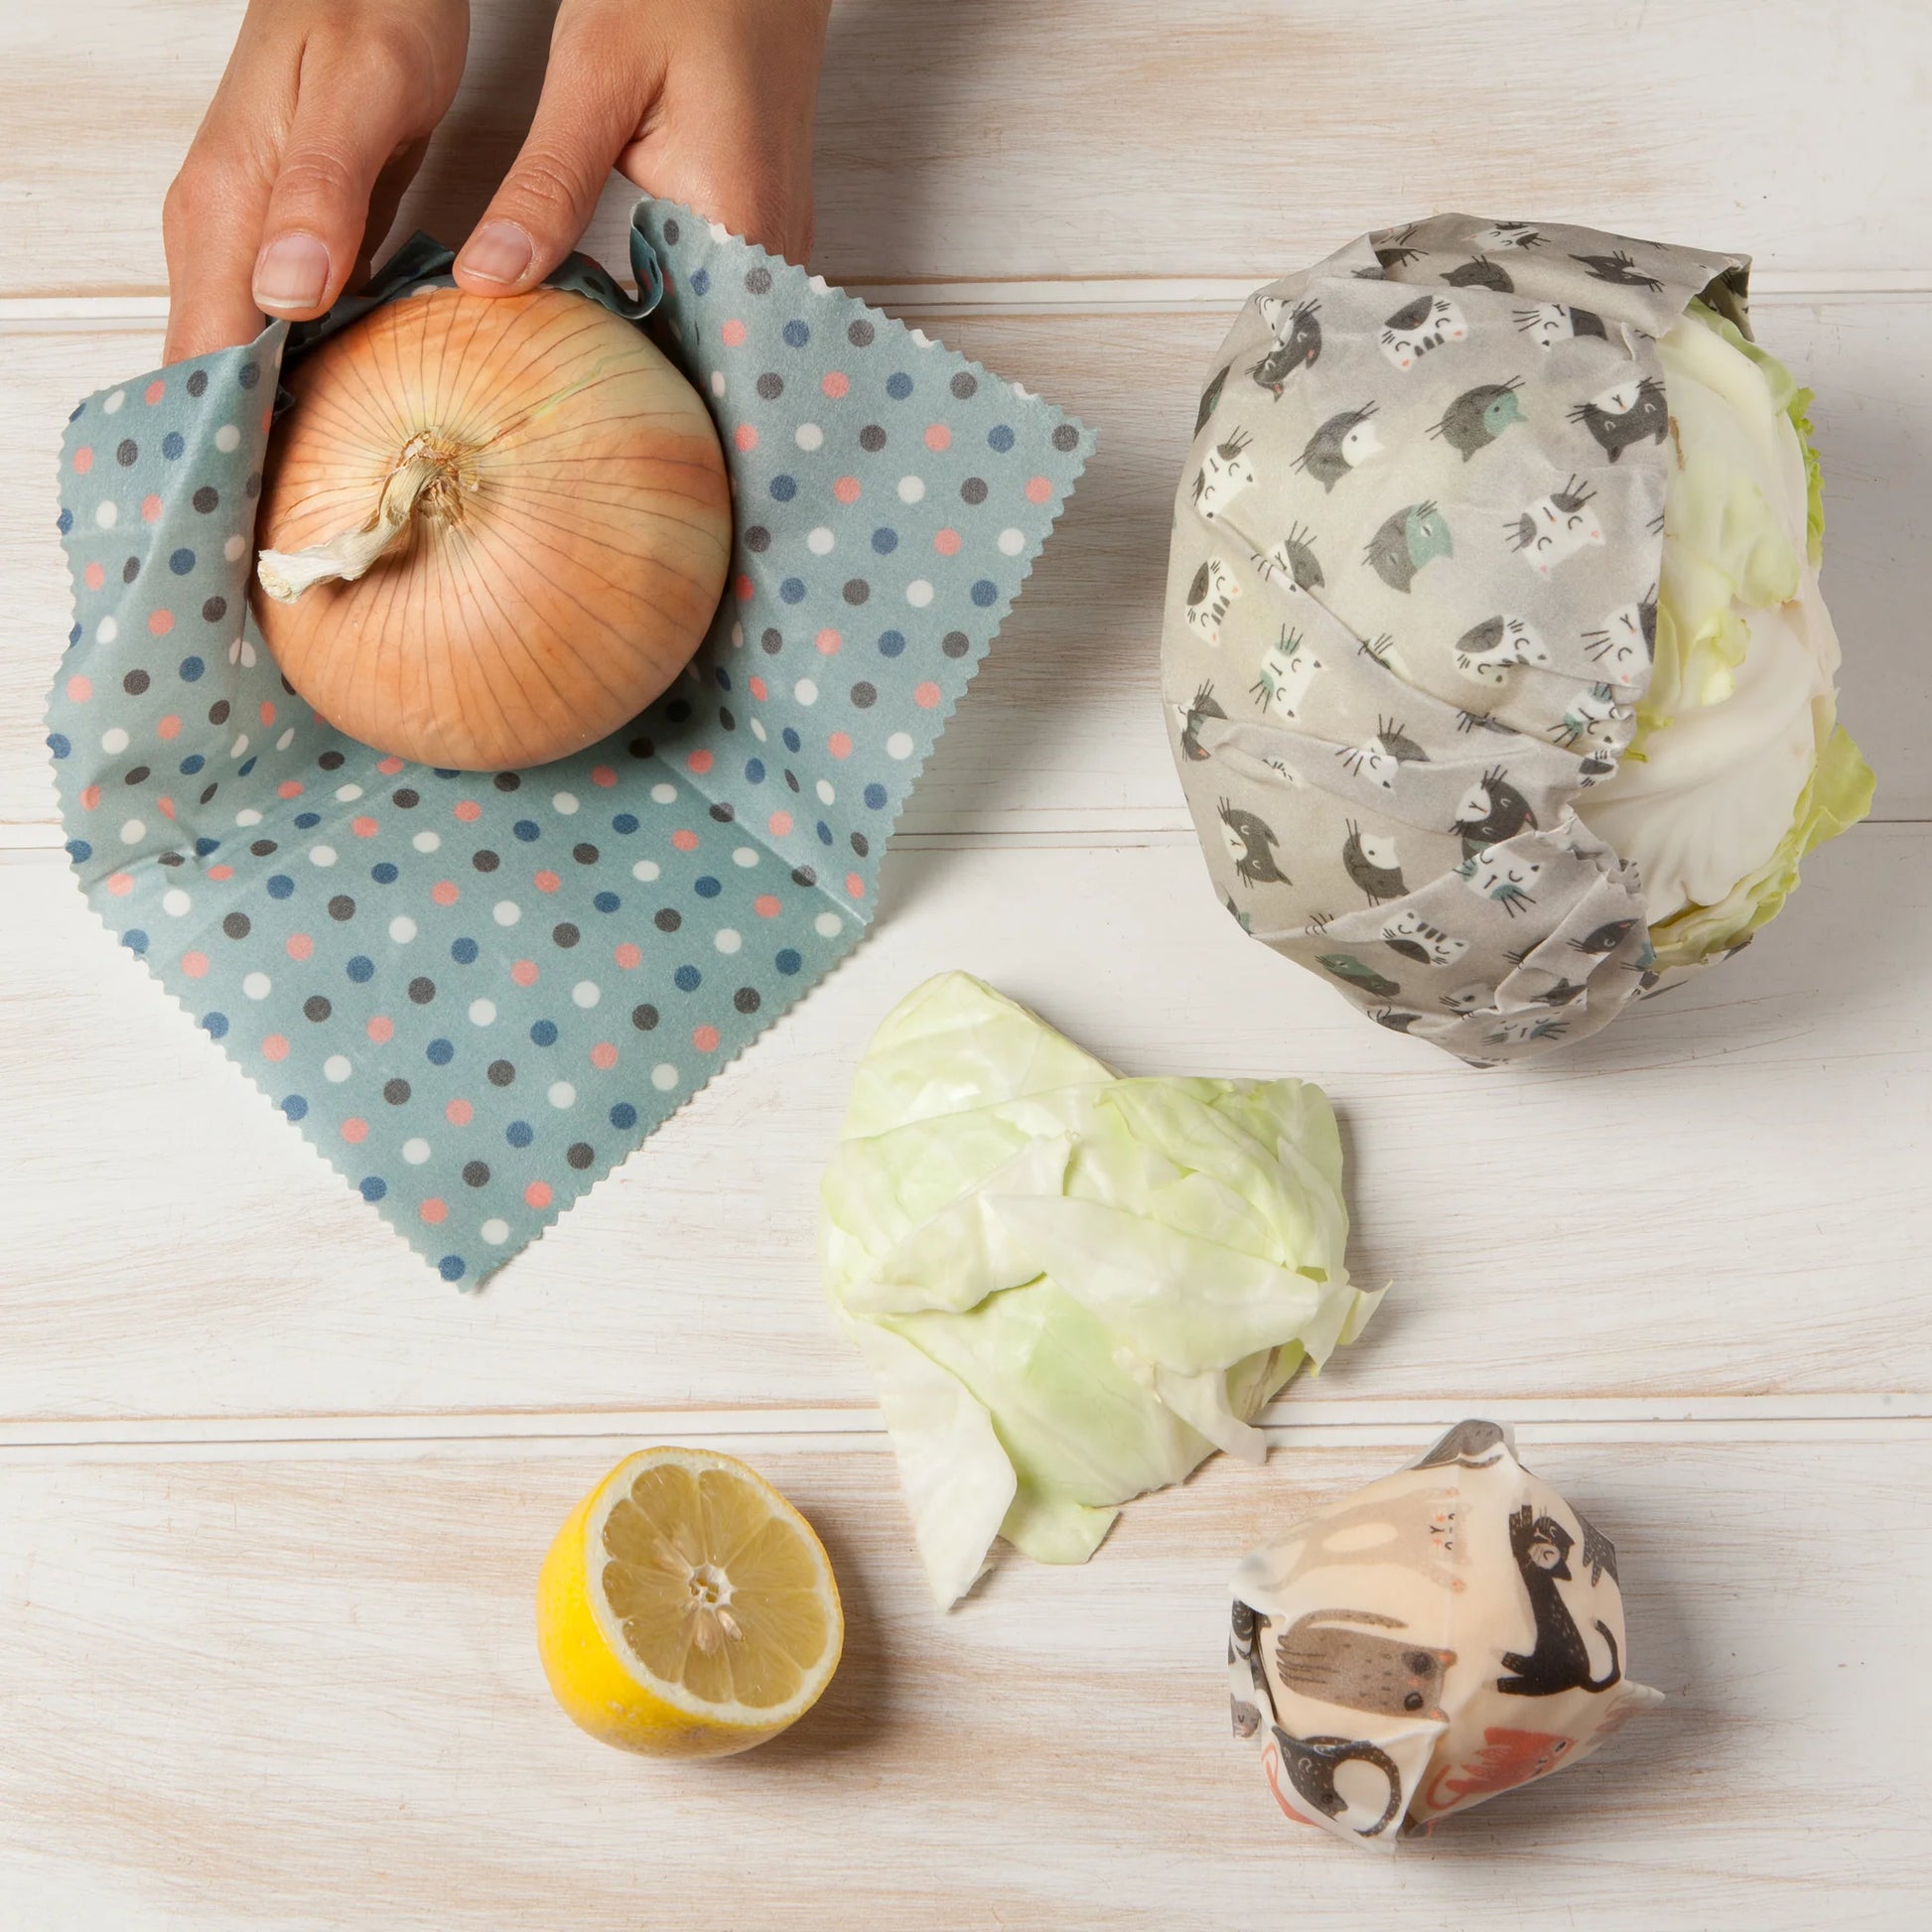 Cats Beeswax Wrap Set of 3